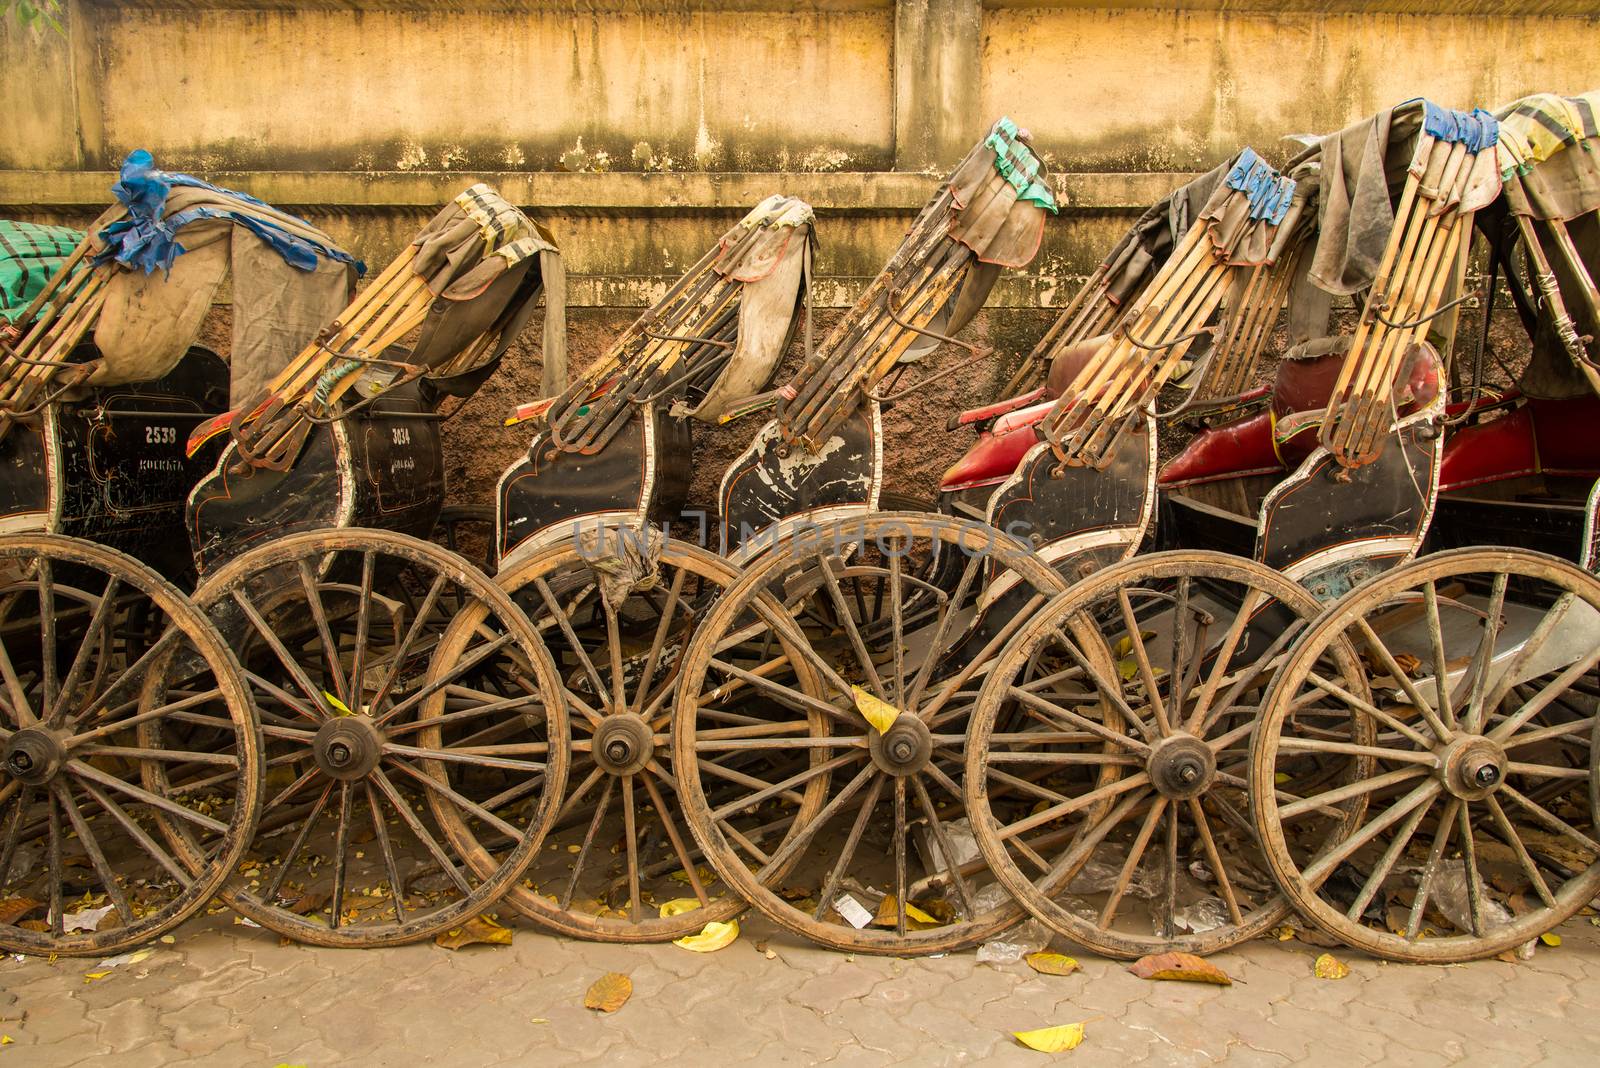 Side view of hand pulled cart rickshaws parked together.